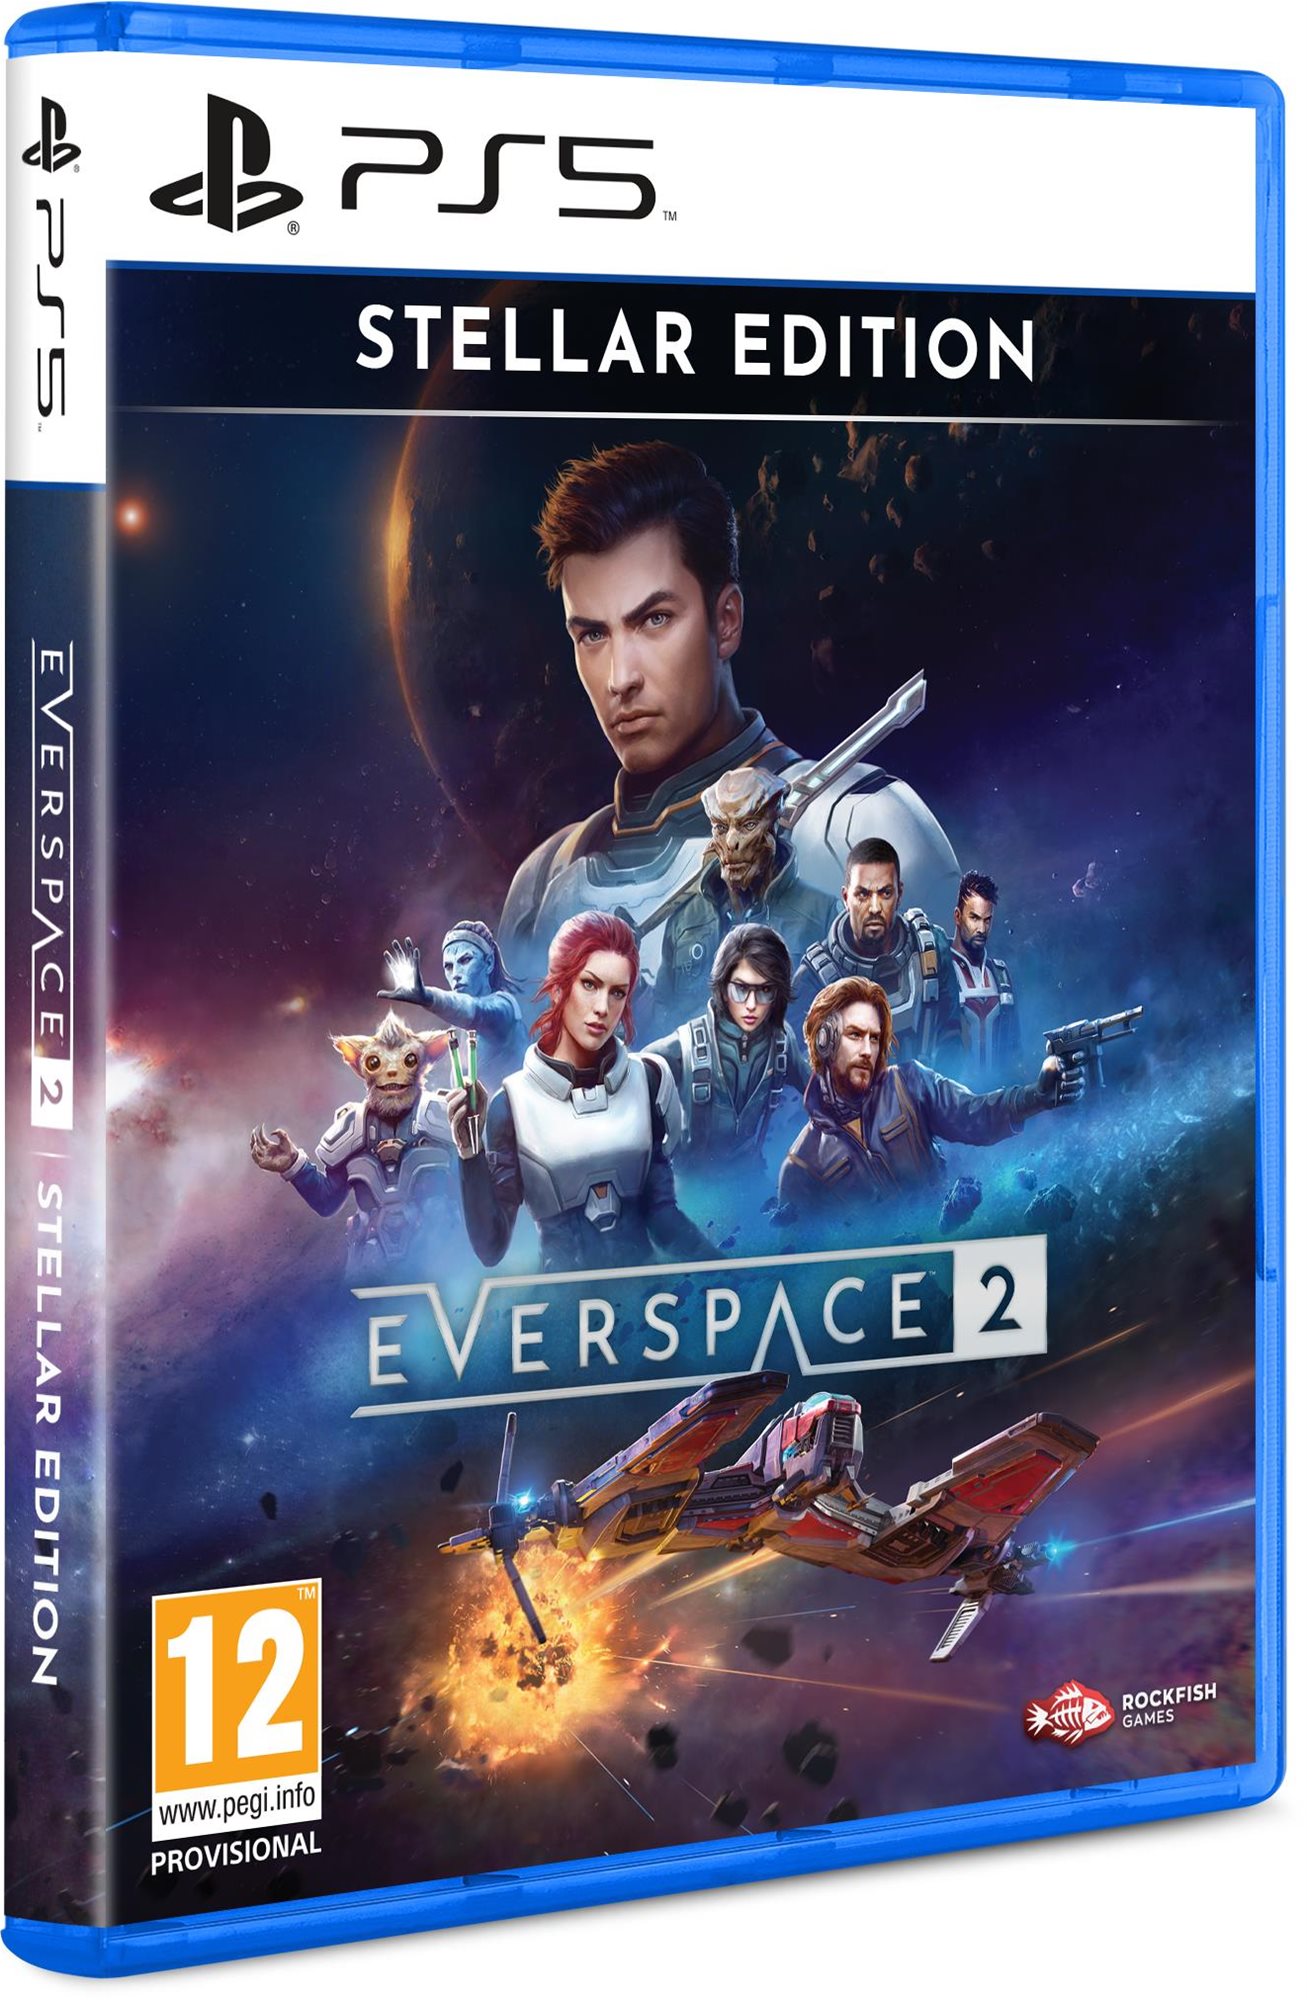 EVERSPACE 2: Stellar Edition - PS5